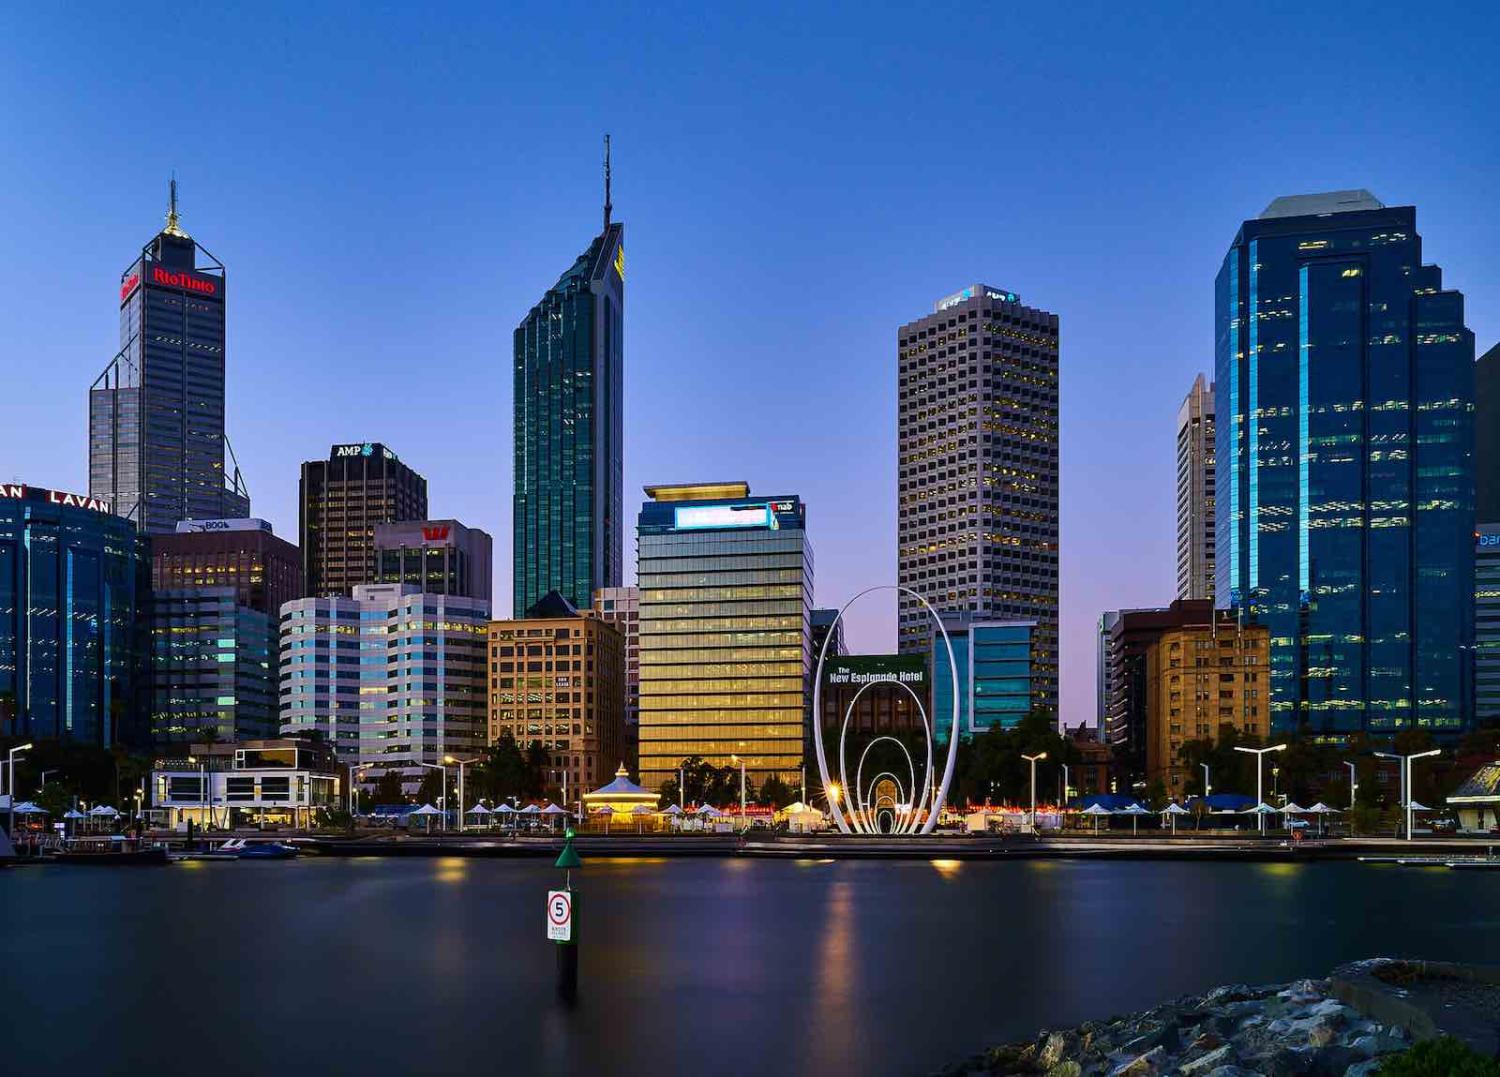 Perth, Australia, a model of urban water conservation (Photo: Pedro Szekely/Flickr)